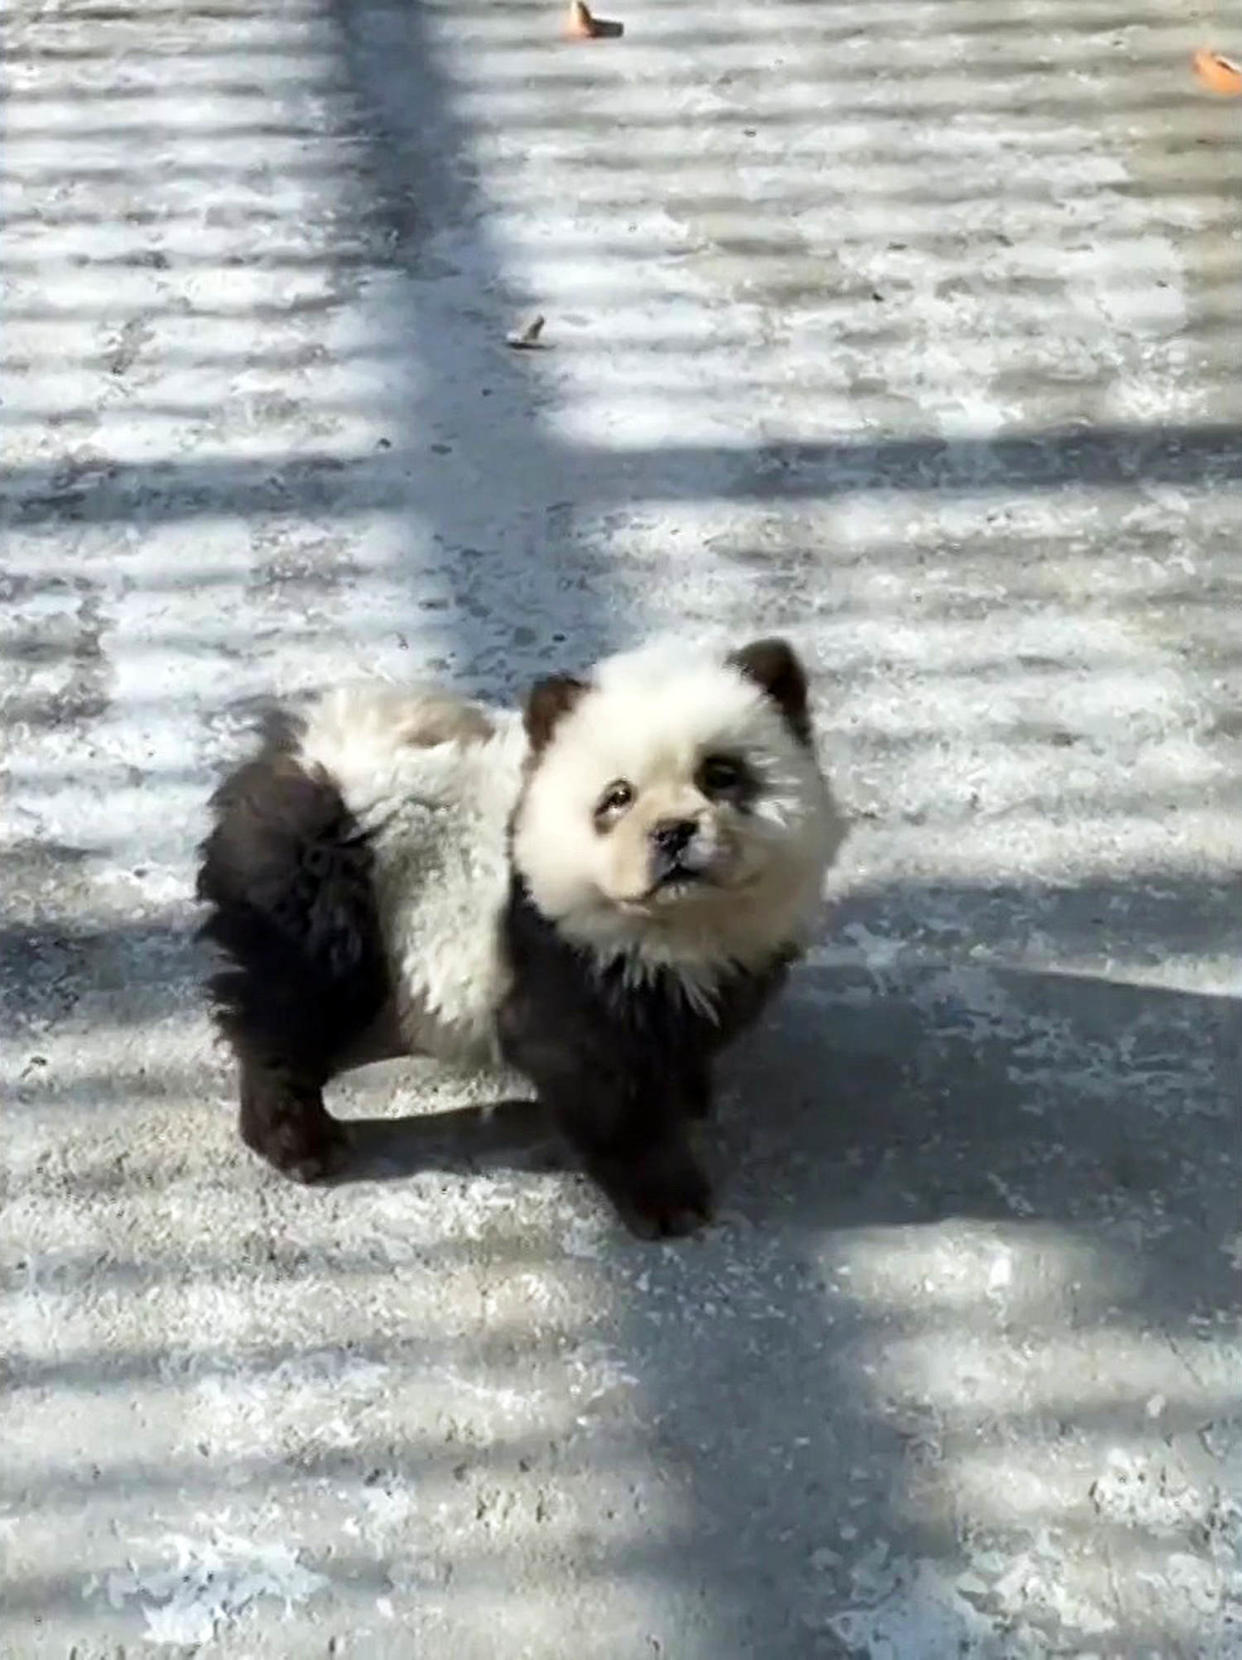 Dyes dog to look like baby pandas. (Newsflare / TODAY)